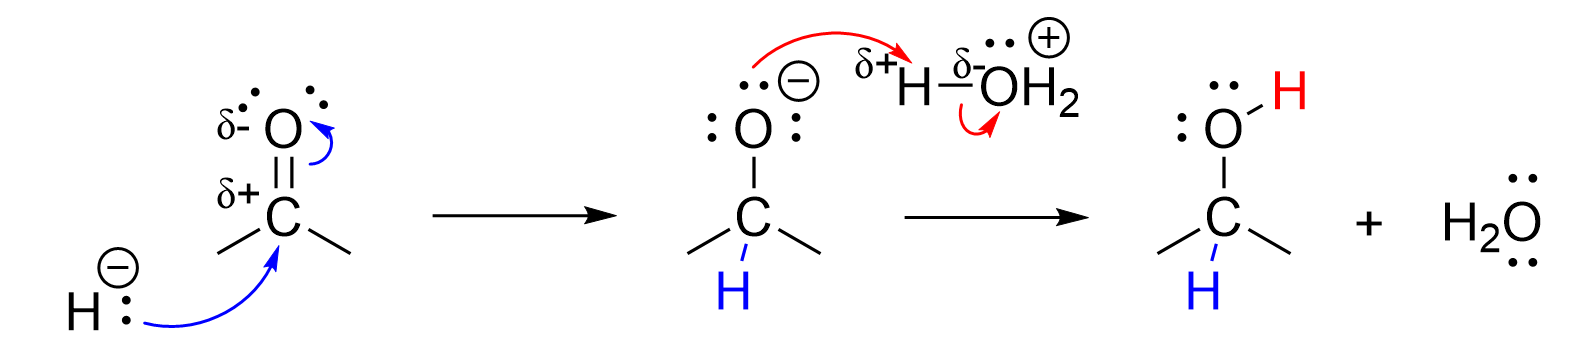 The lone pair on a hydride attacks the carbon-center of the ketone and the electrons in the pi bond are pushed up to the oxygen. The alkoxide is protonated by acid (H3O+) to a secondary alcohol and water is a by-product.